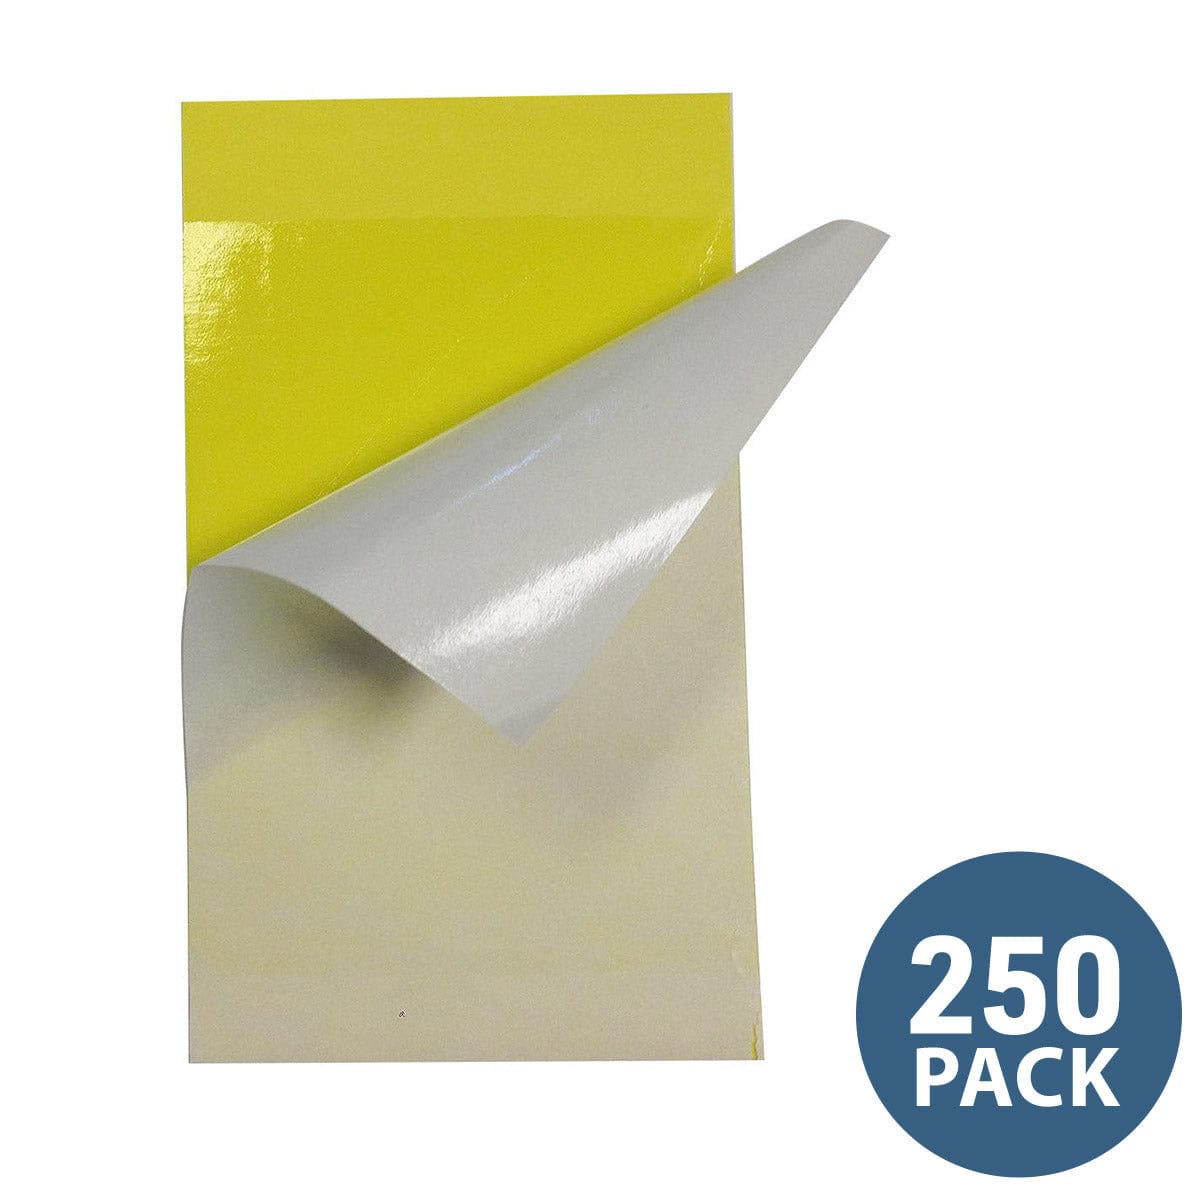 3" W x 5" L Insect Control Yellow Sticky Traps | 250 Pack